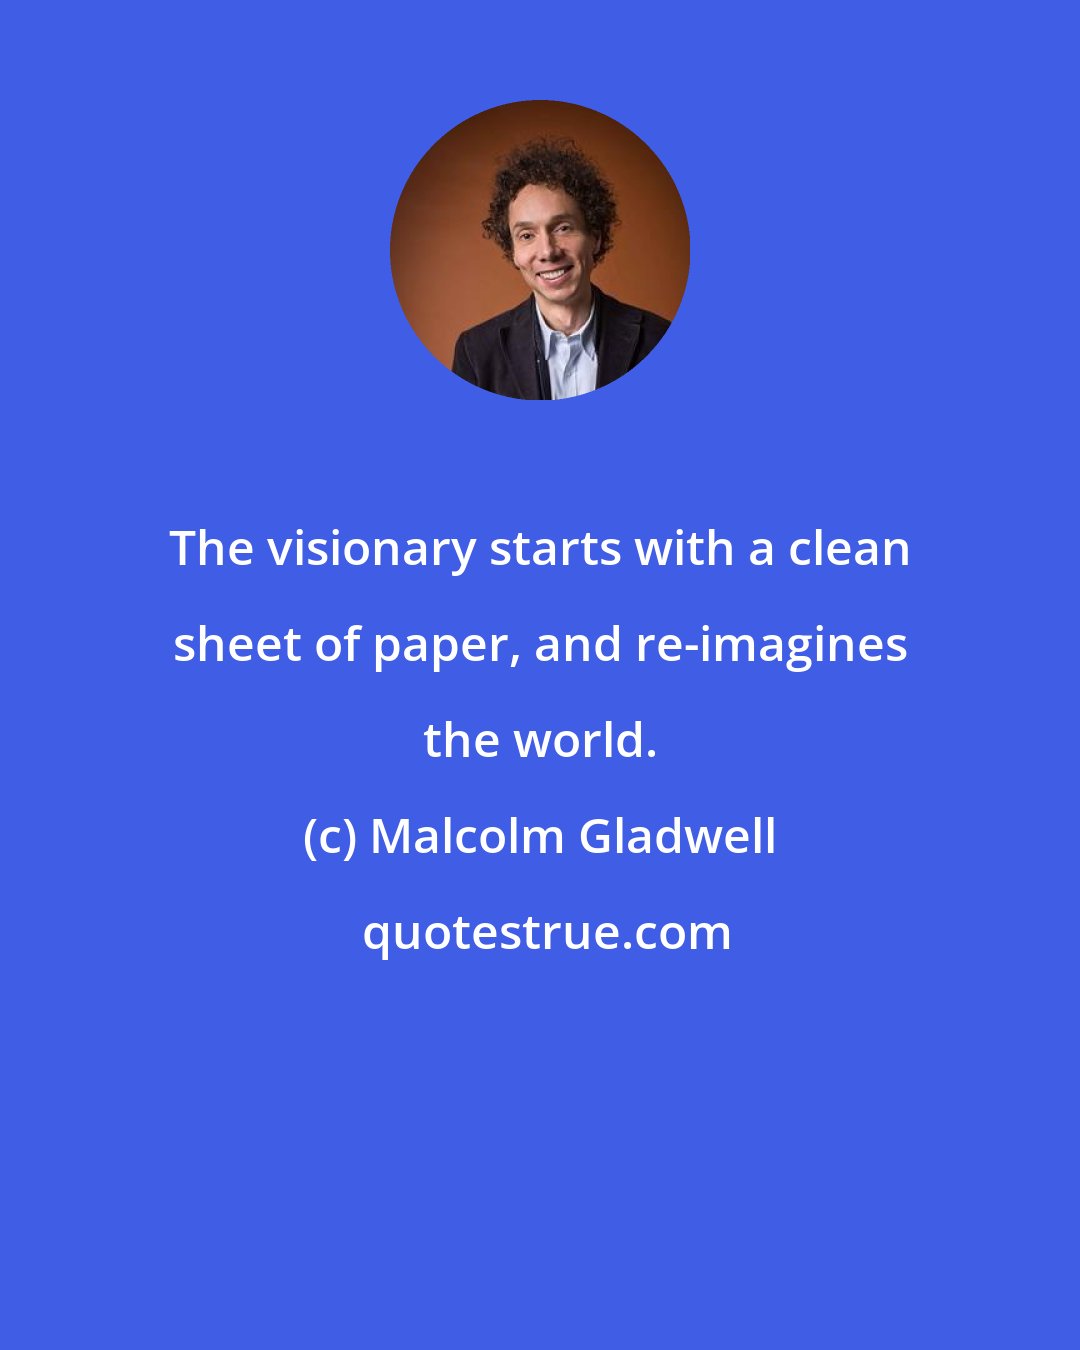 Malcolm Gladwell: The visionary starts with a clean sheet of paper, and re-imagines the world.